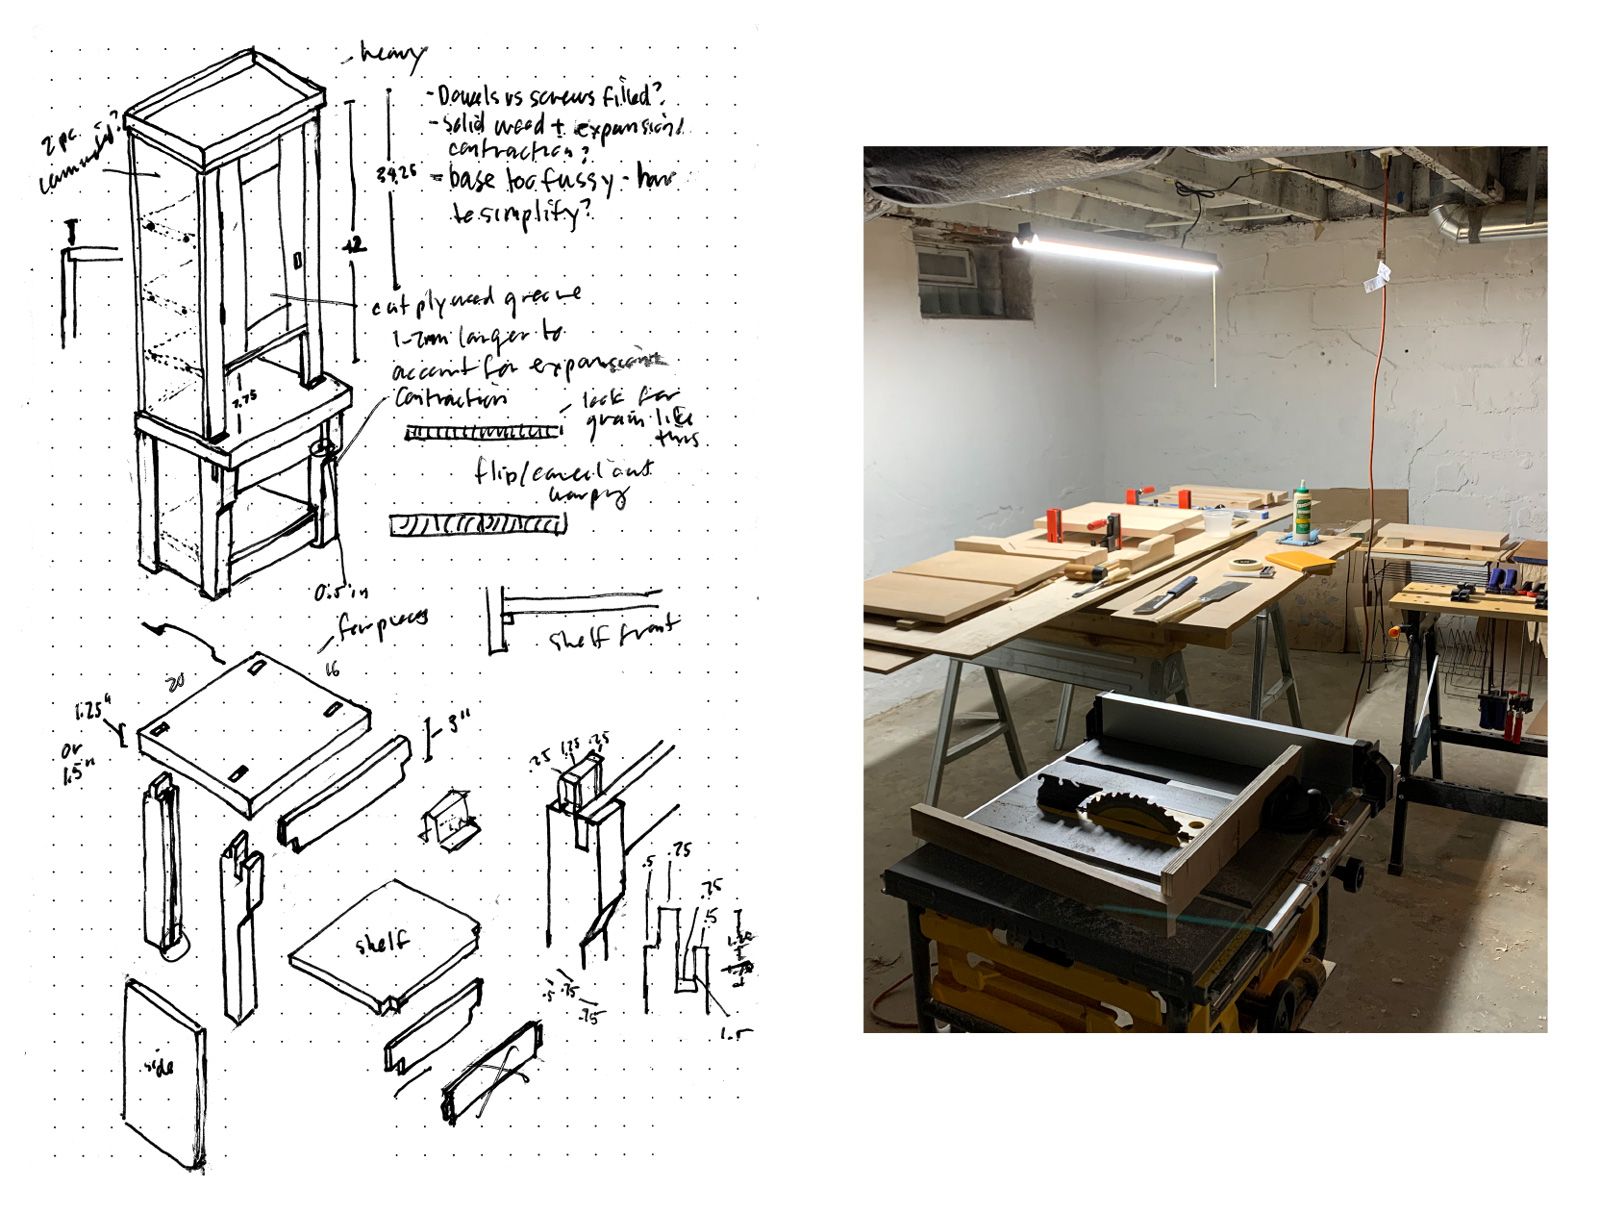 Sketch with exploded view of base, next to in-progress photo of glued boards drying on sawhorses.